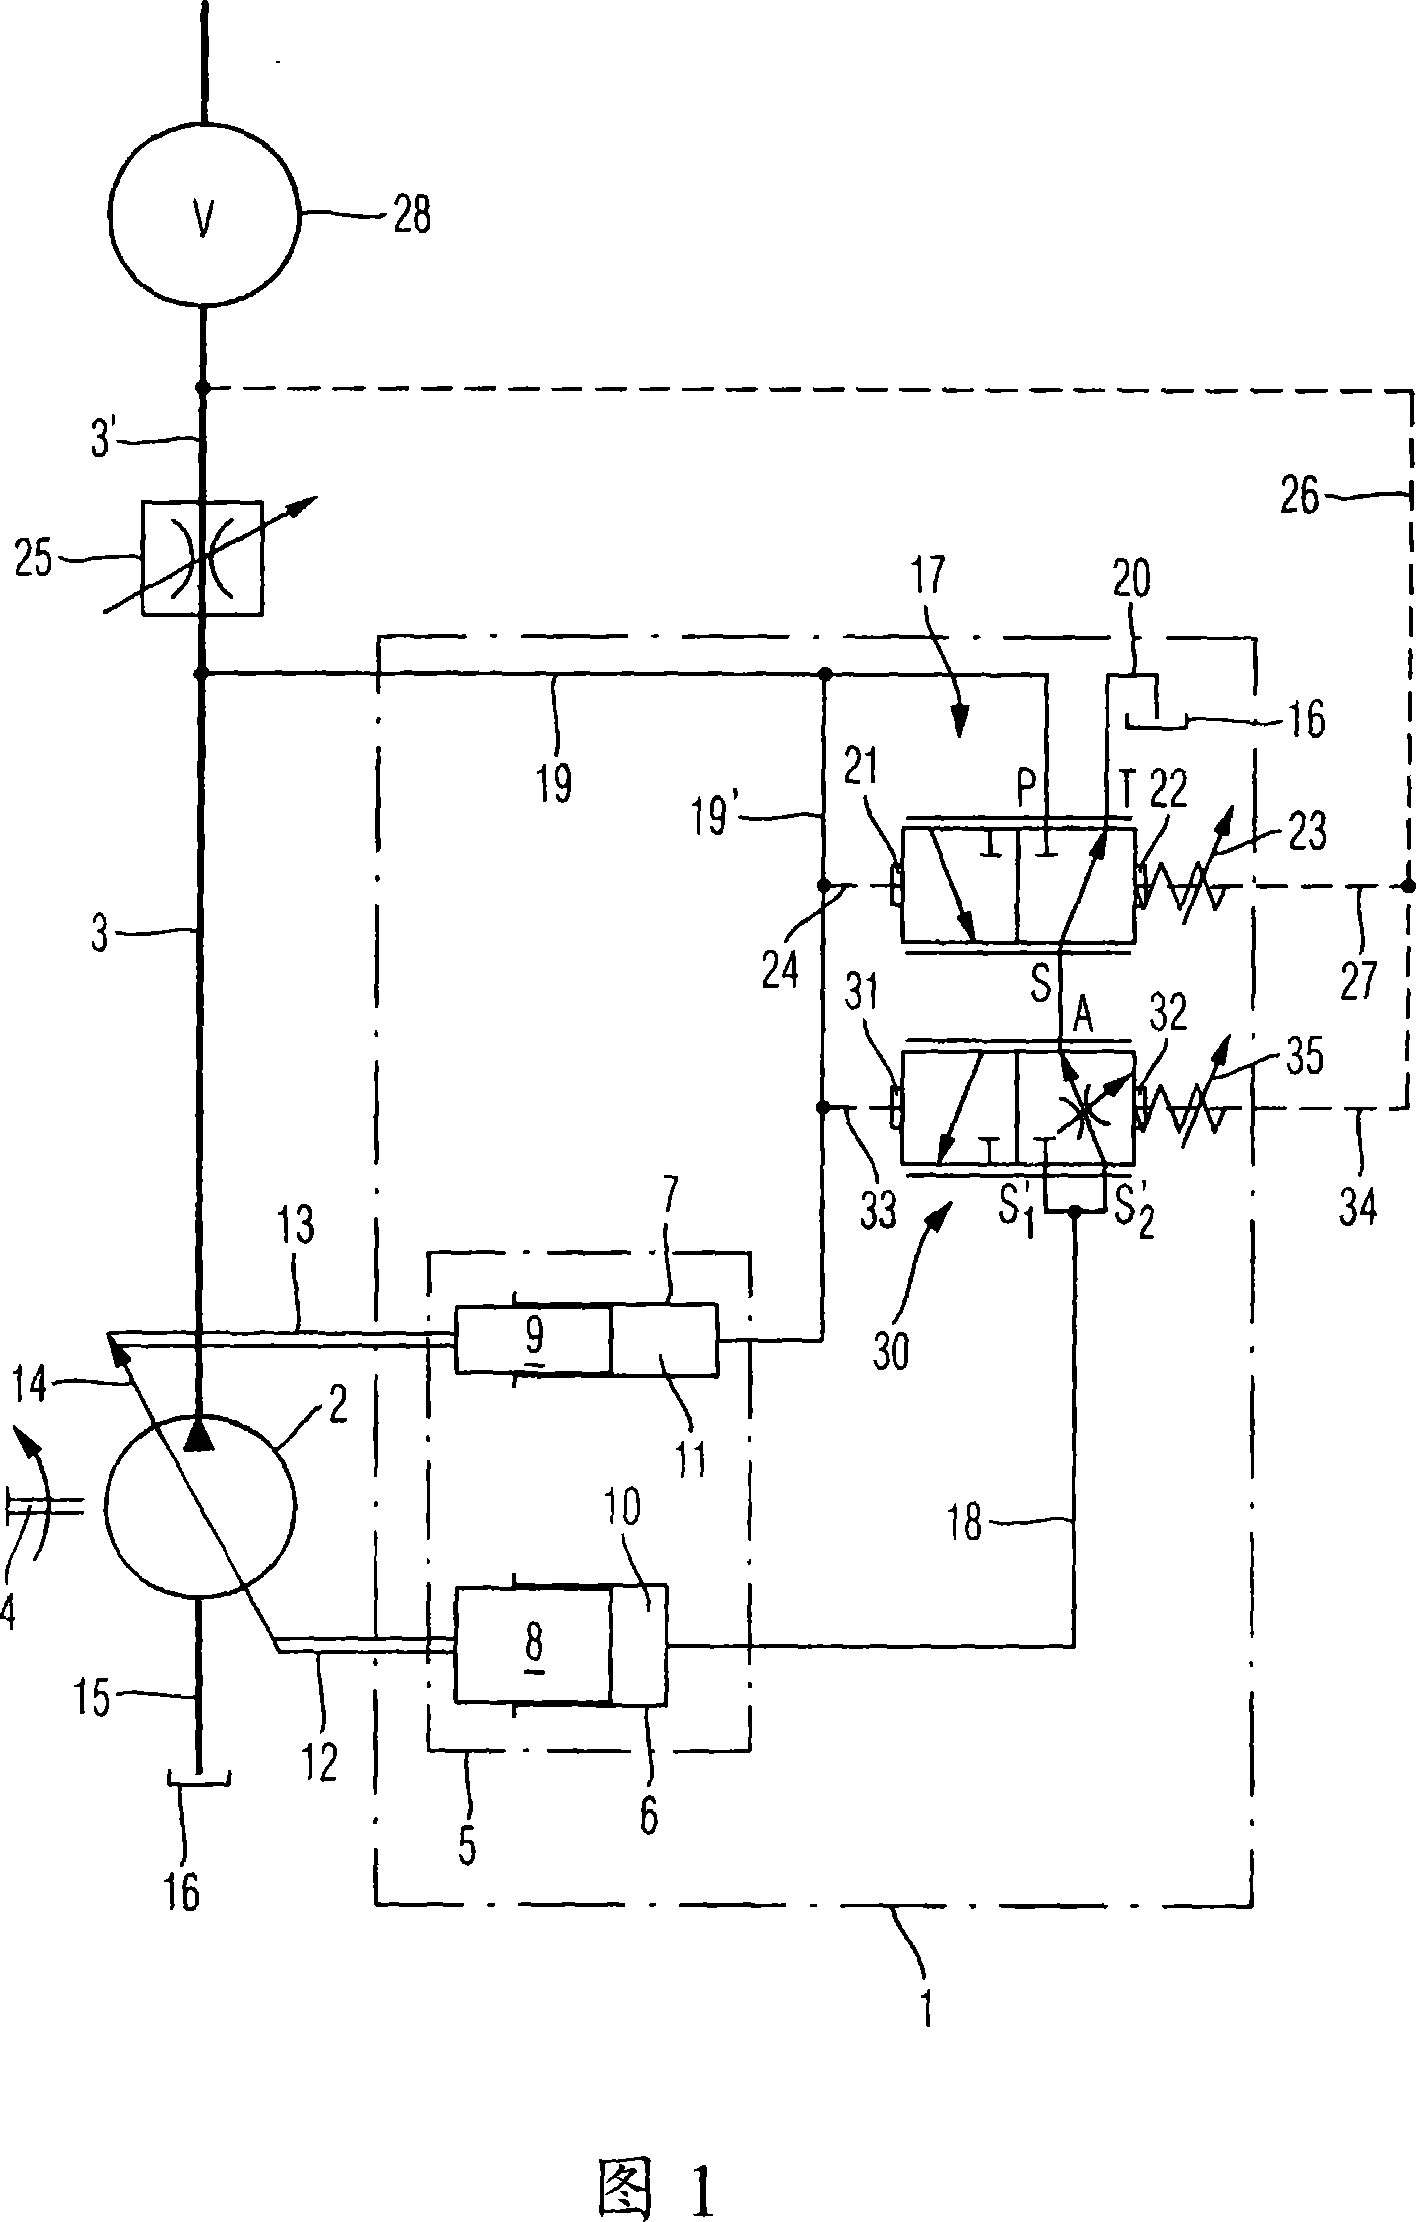 Load-pressure-controlled feed flow regulator with vibration damping